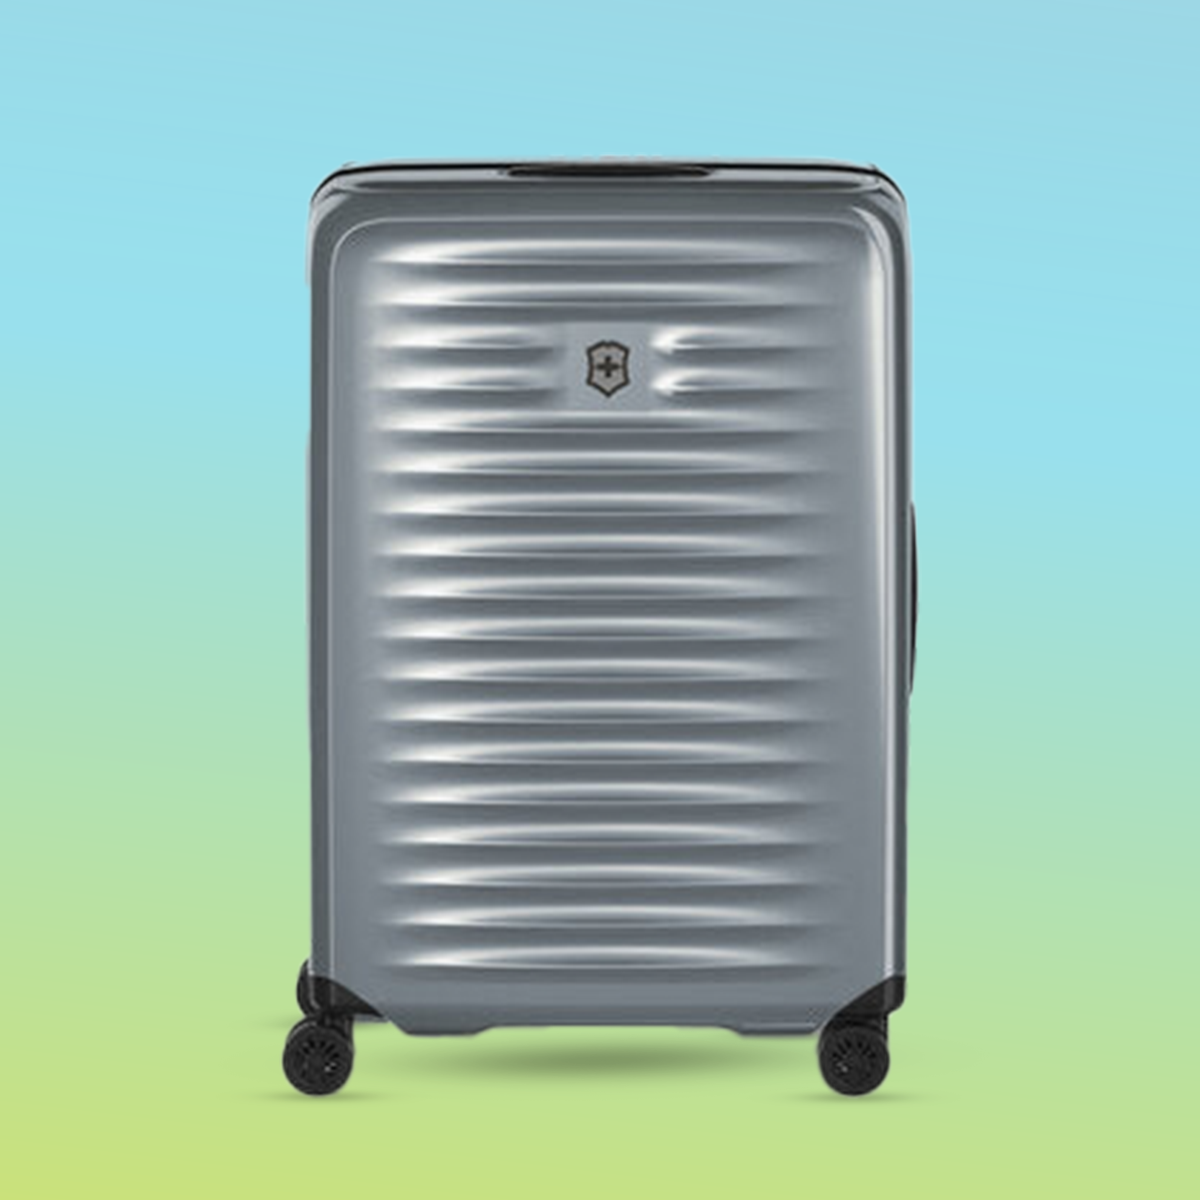 Small Travel Mosaic tile featuring a Victorinox silver hard shell suitcase with a gradient background